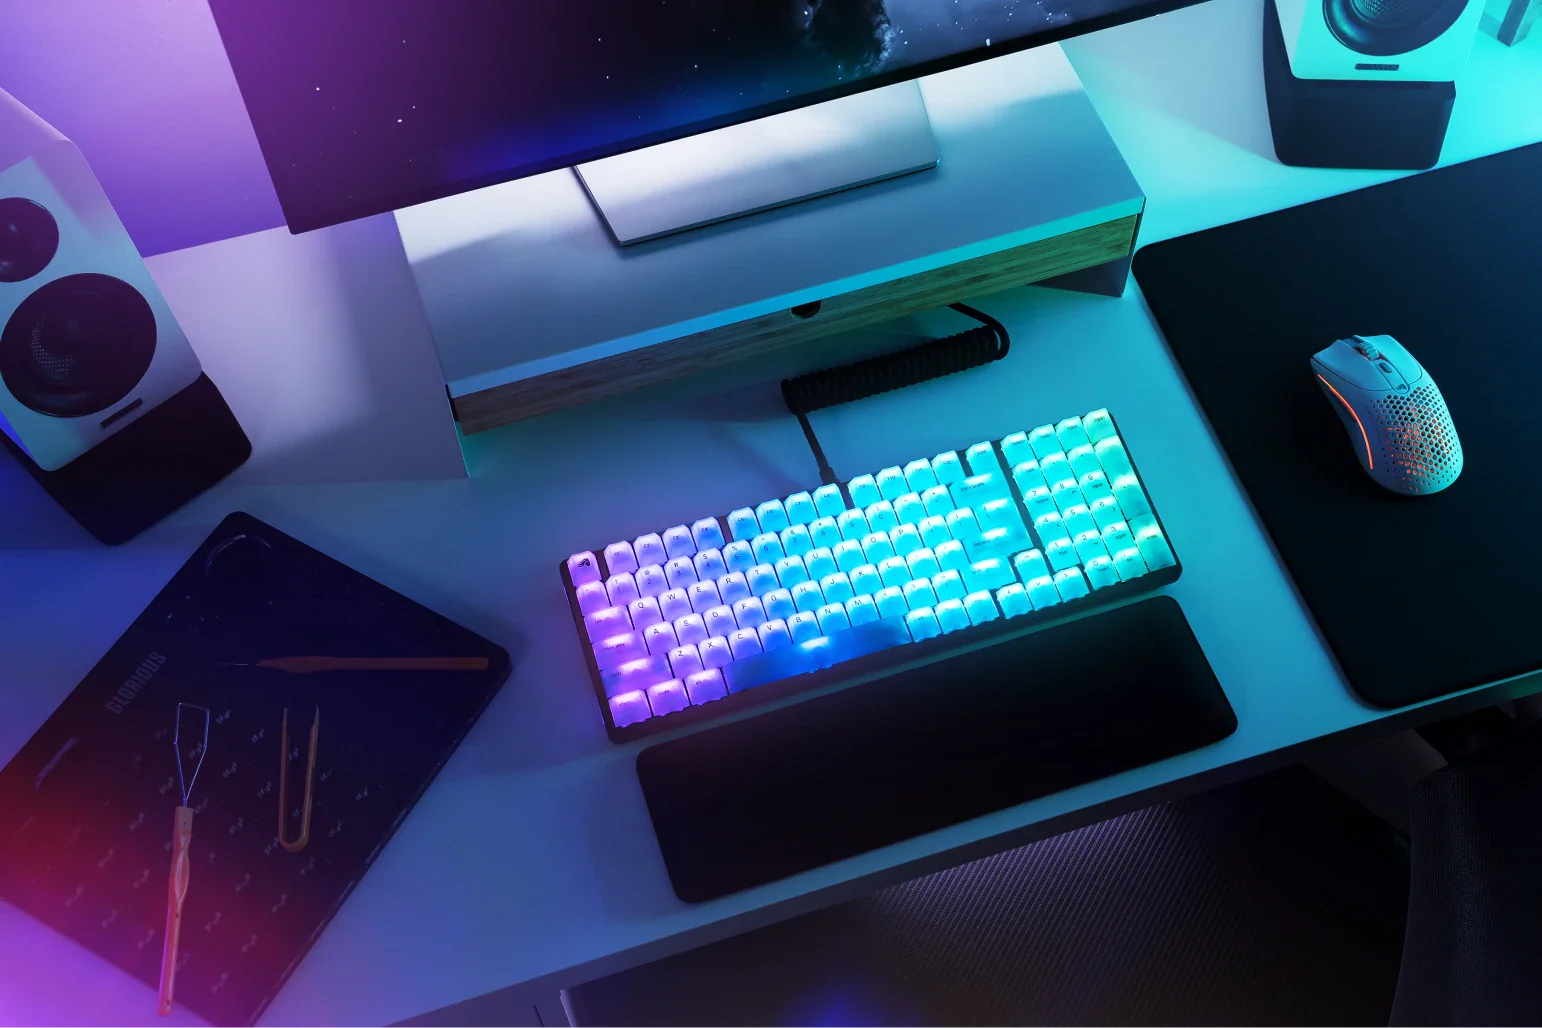 Polychroma RGB keycaps shown in a desk setup with blue and purple lighting